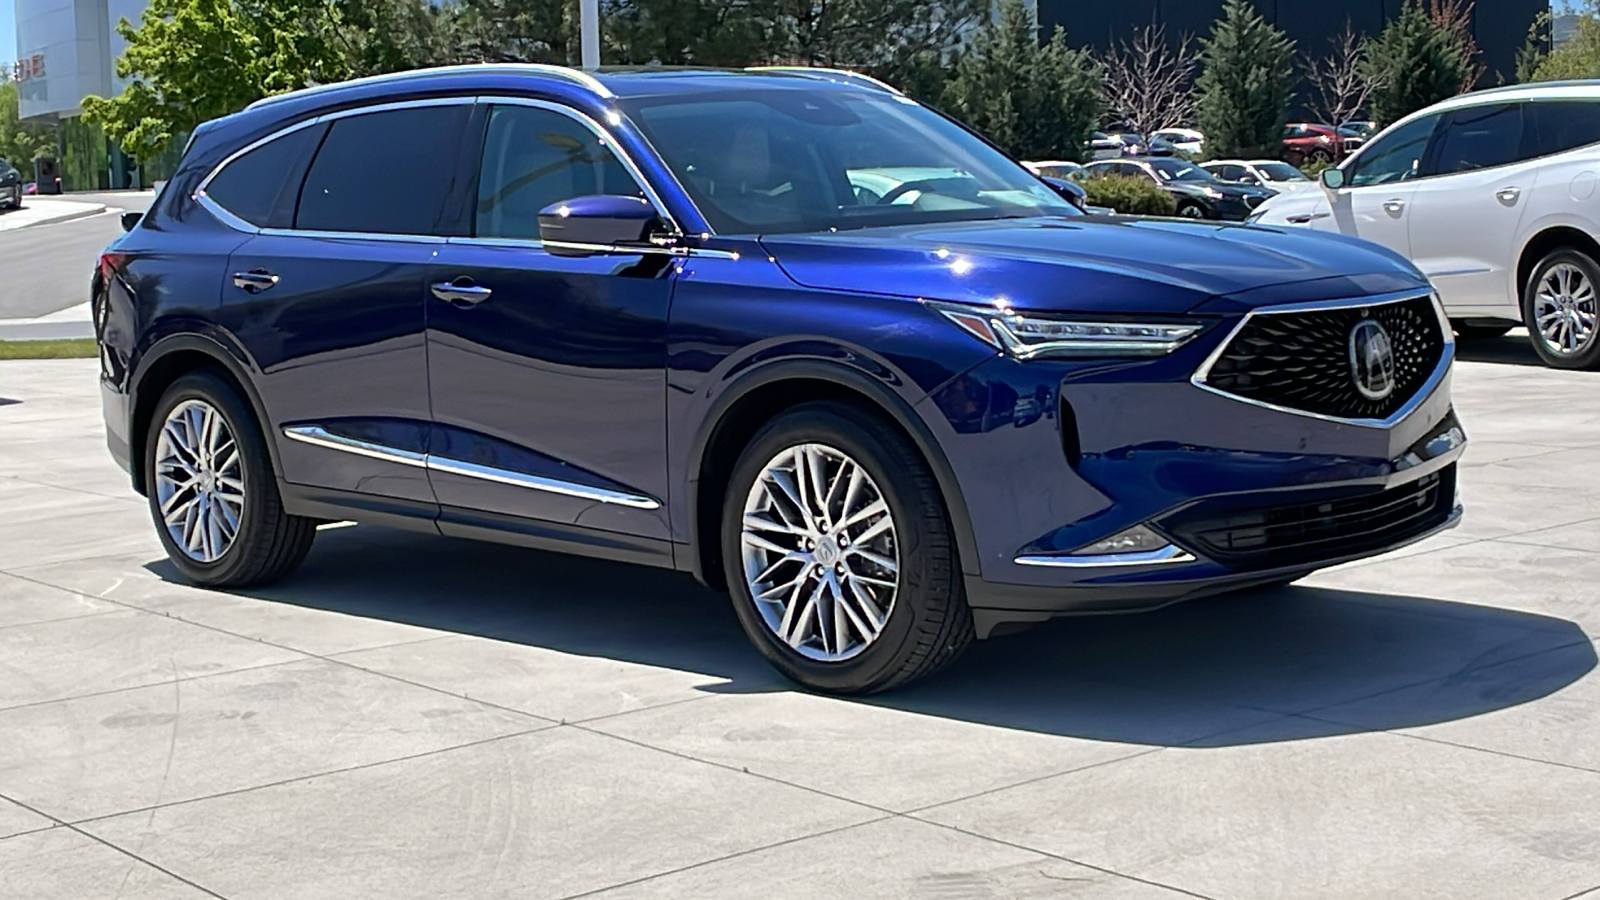 2022 Acura MDX w/Advance Package 2